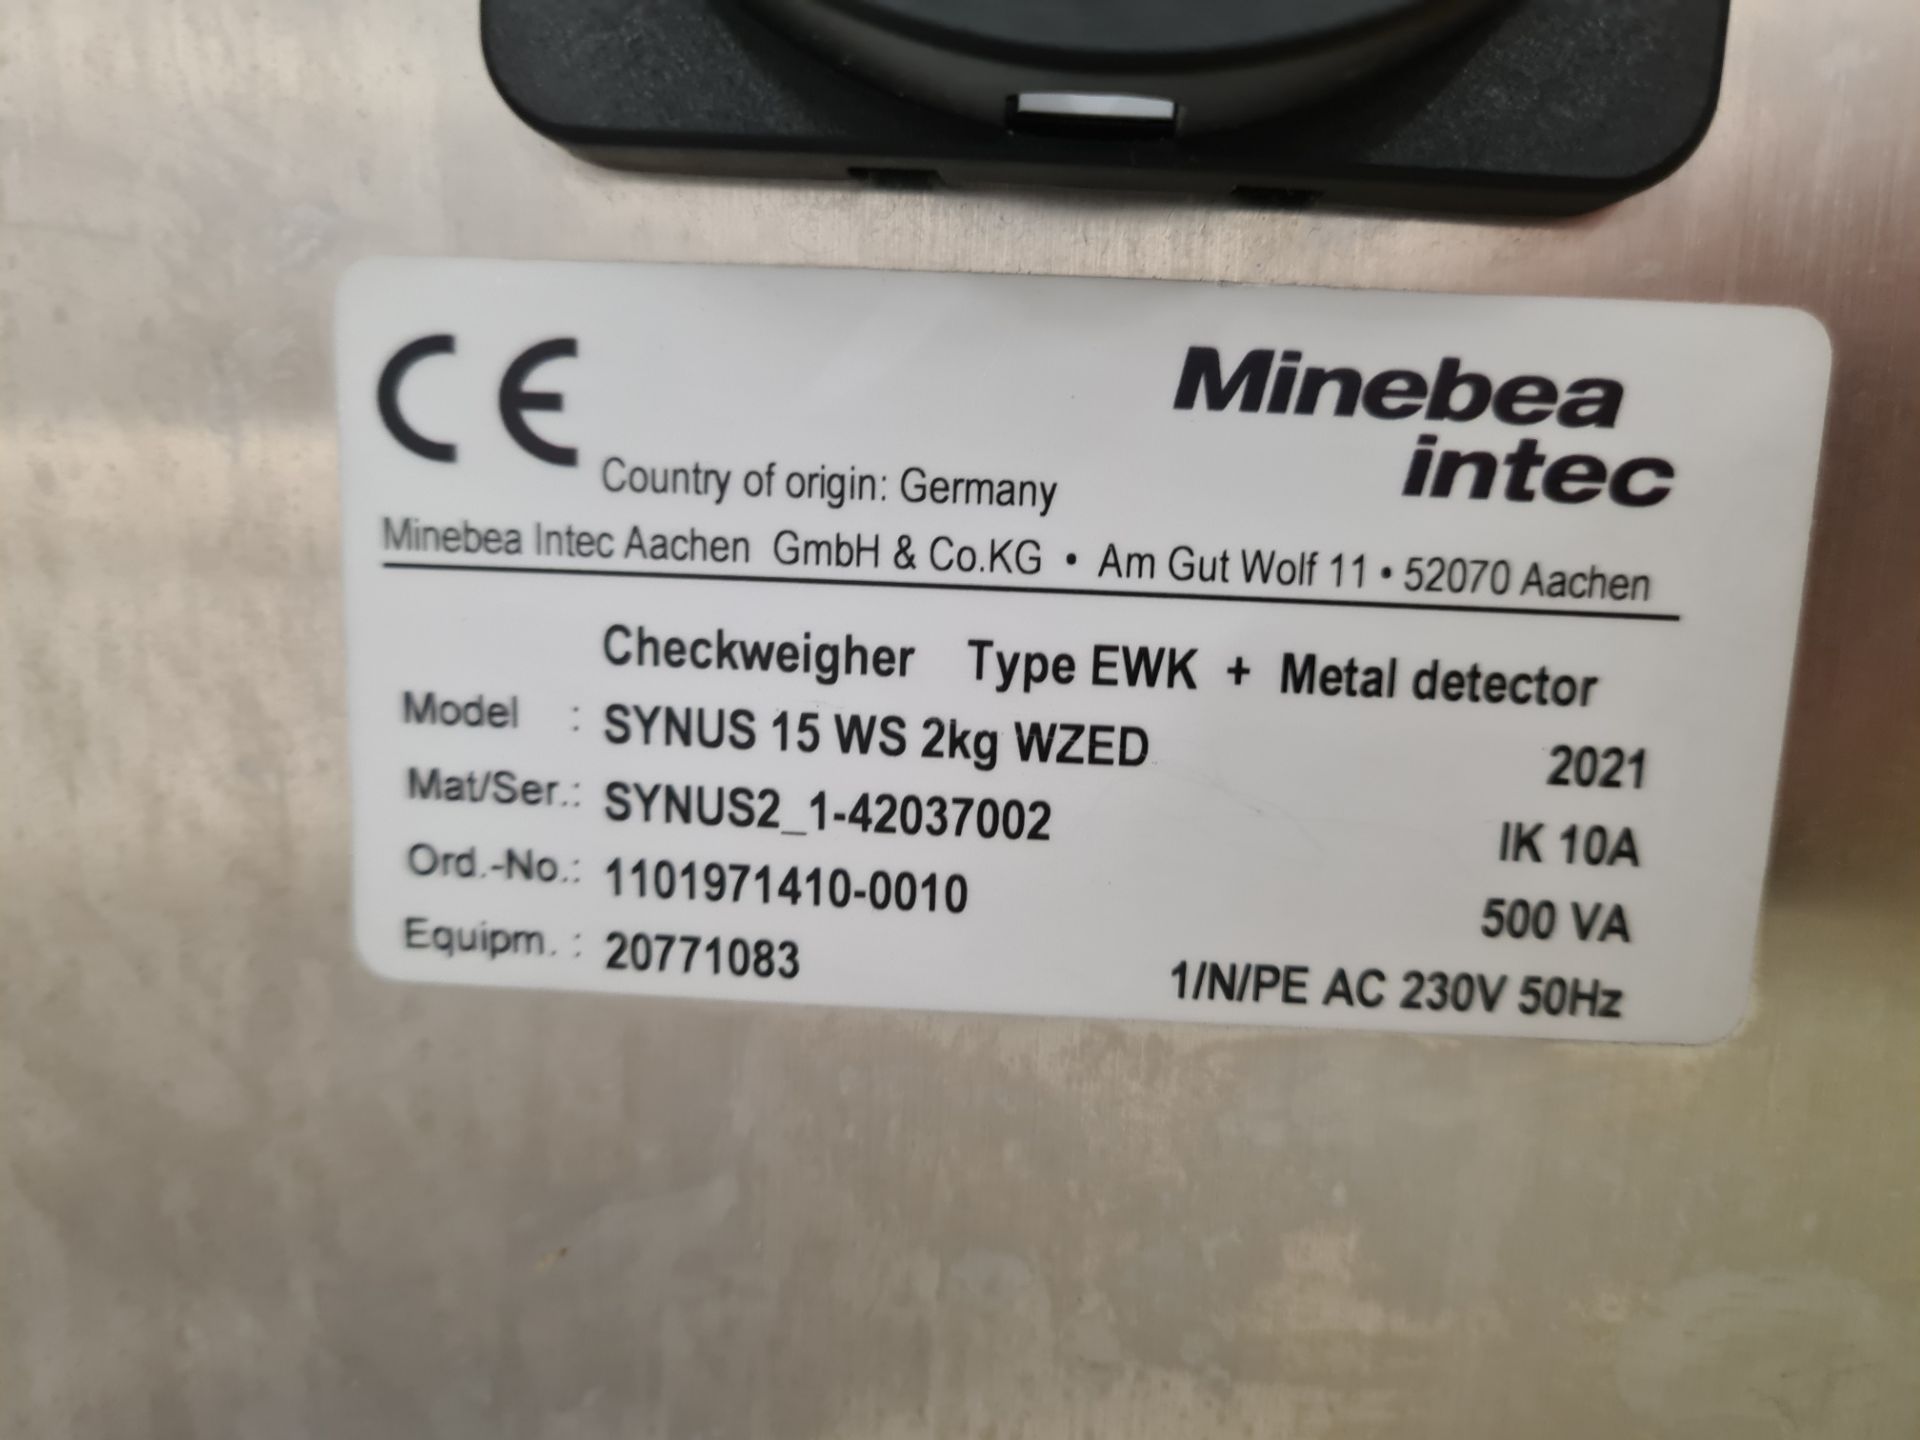 Minebea Intec SYNUS 15WF 2KG WZED STAINLESS STEEL CHECK WEIGHER METAL DETECTOR, serial no. - Image 6 of 6